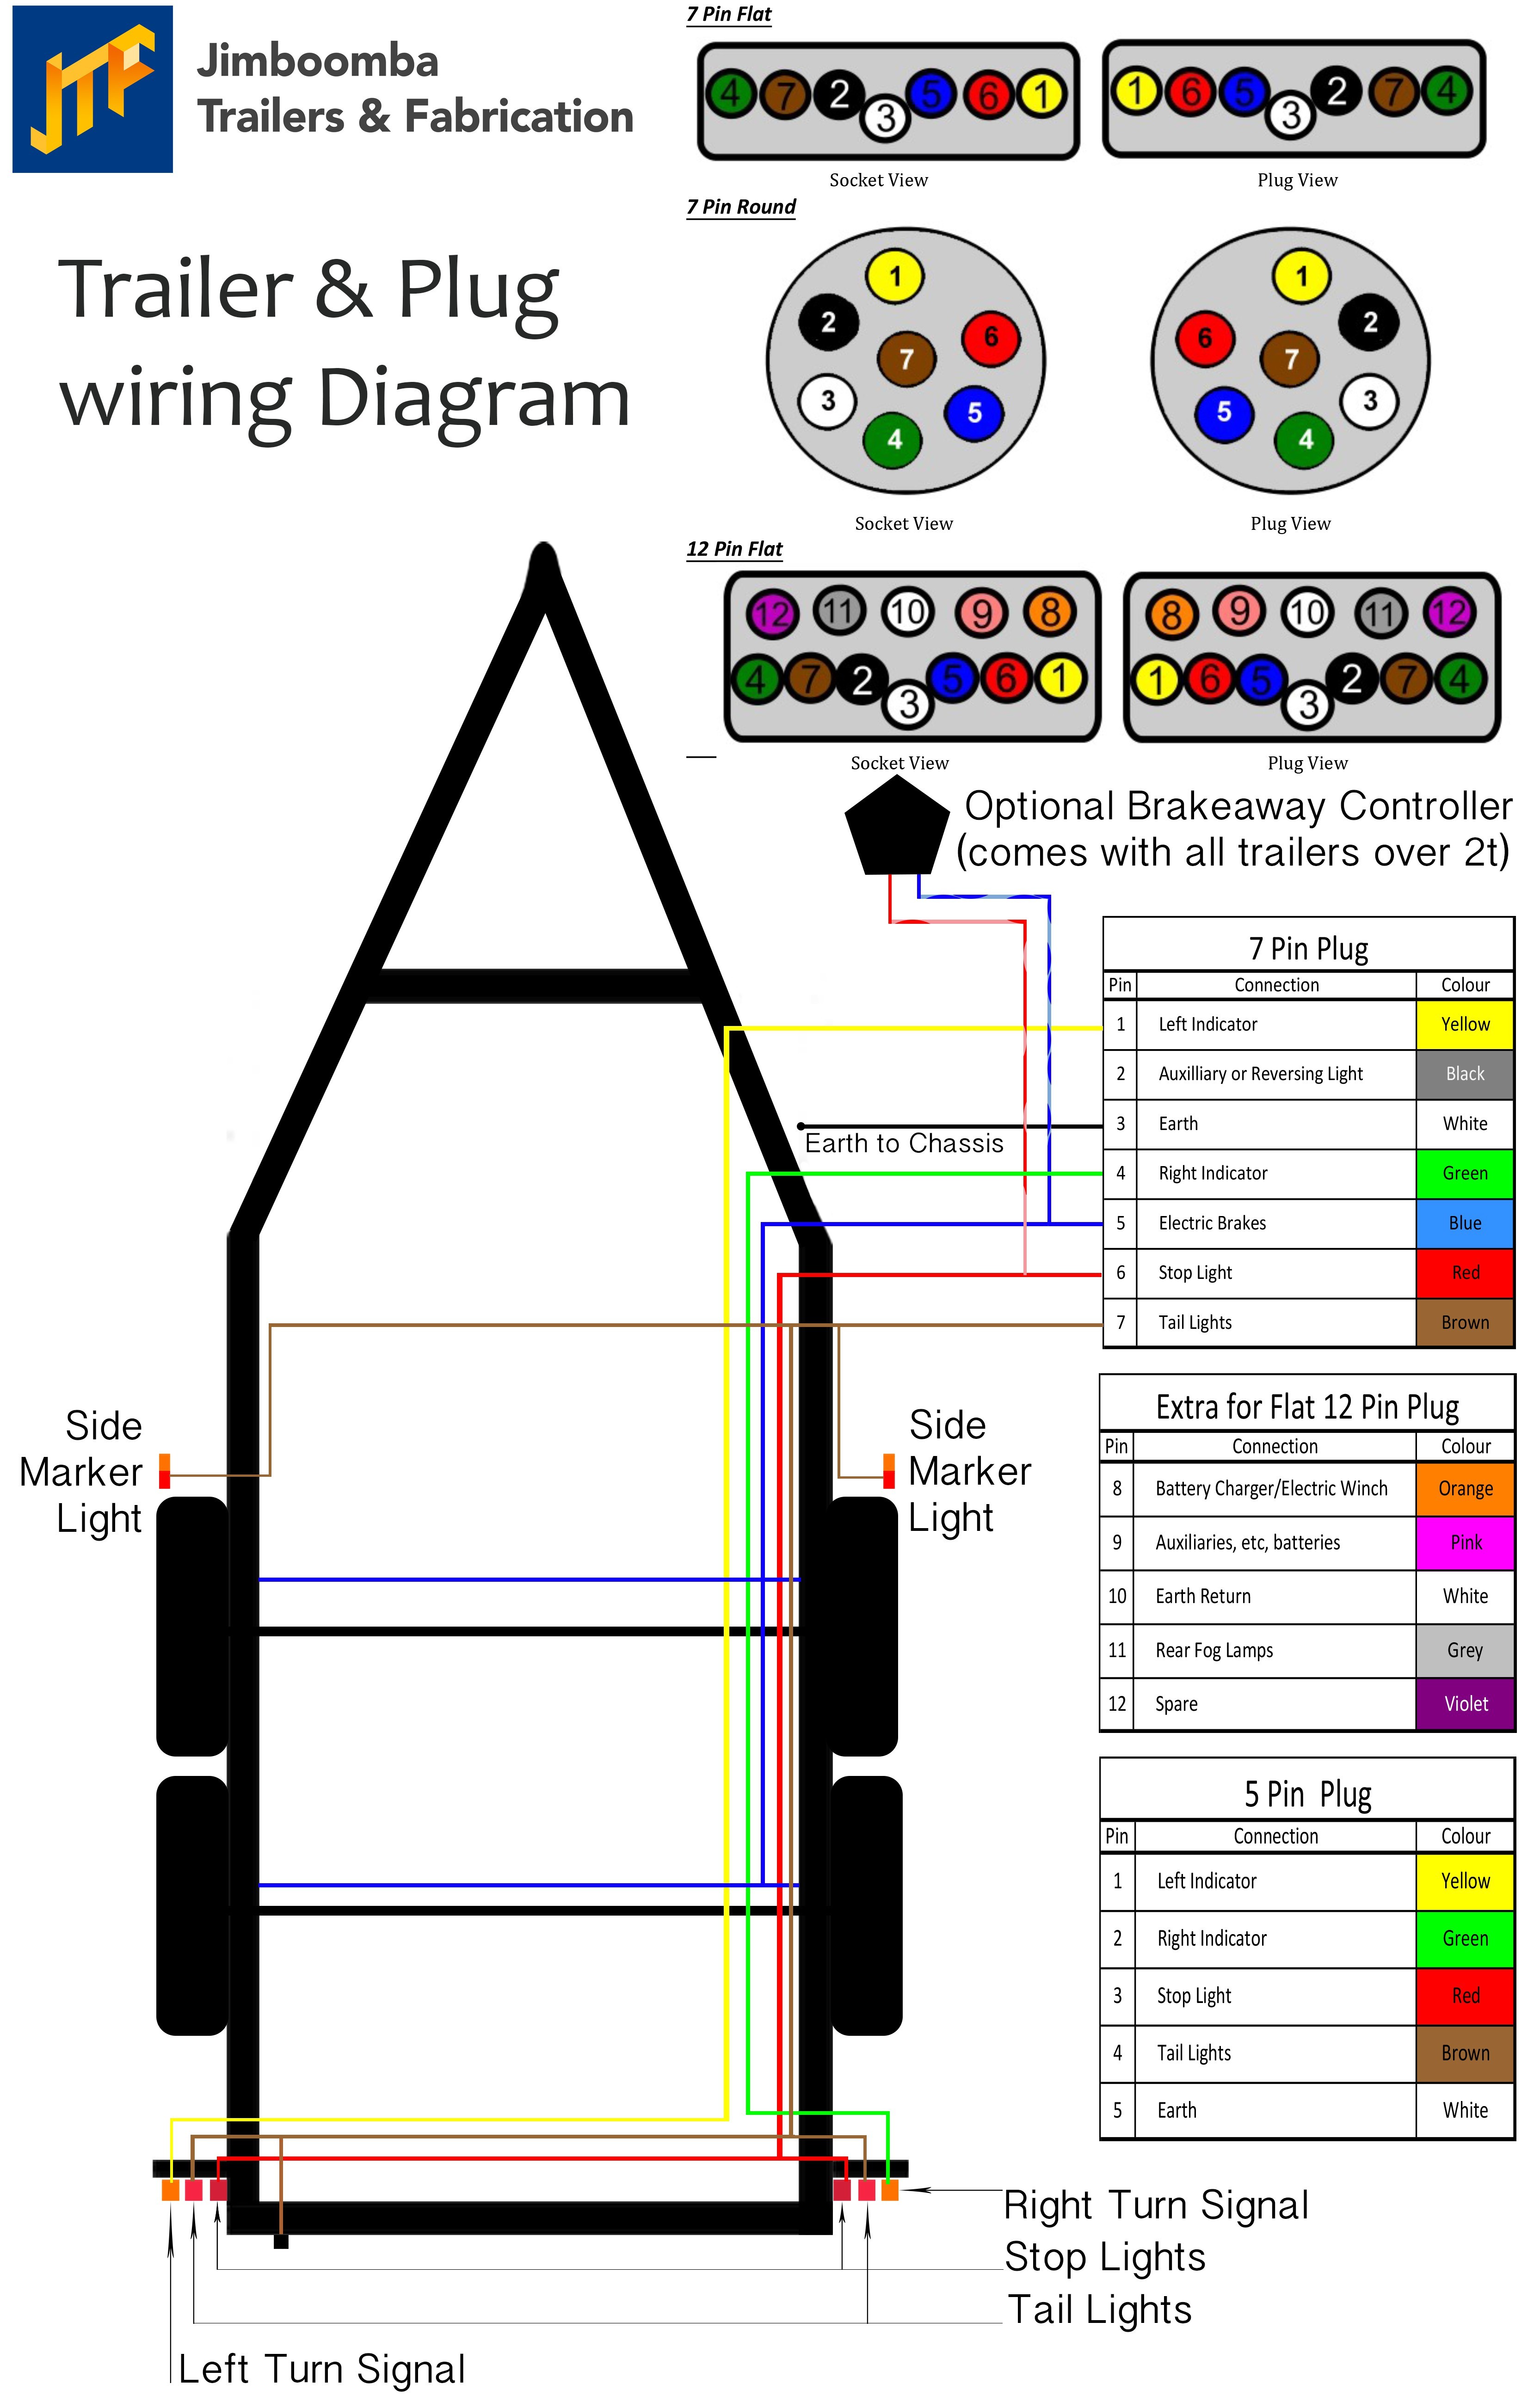 Led Tail Light Wiring Diagram Collection 3 Wire Led Tail Light Wiring Diagram Luxury Best